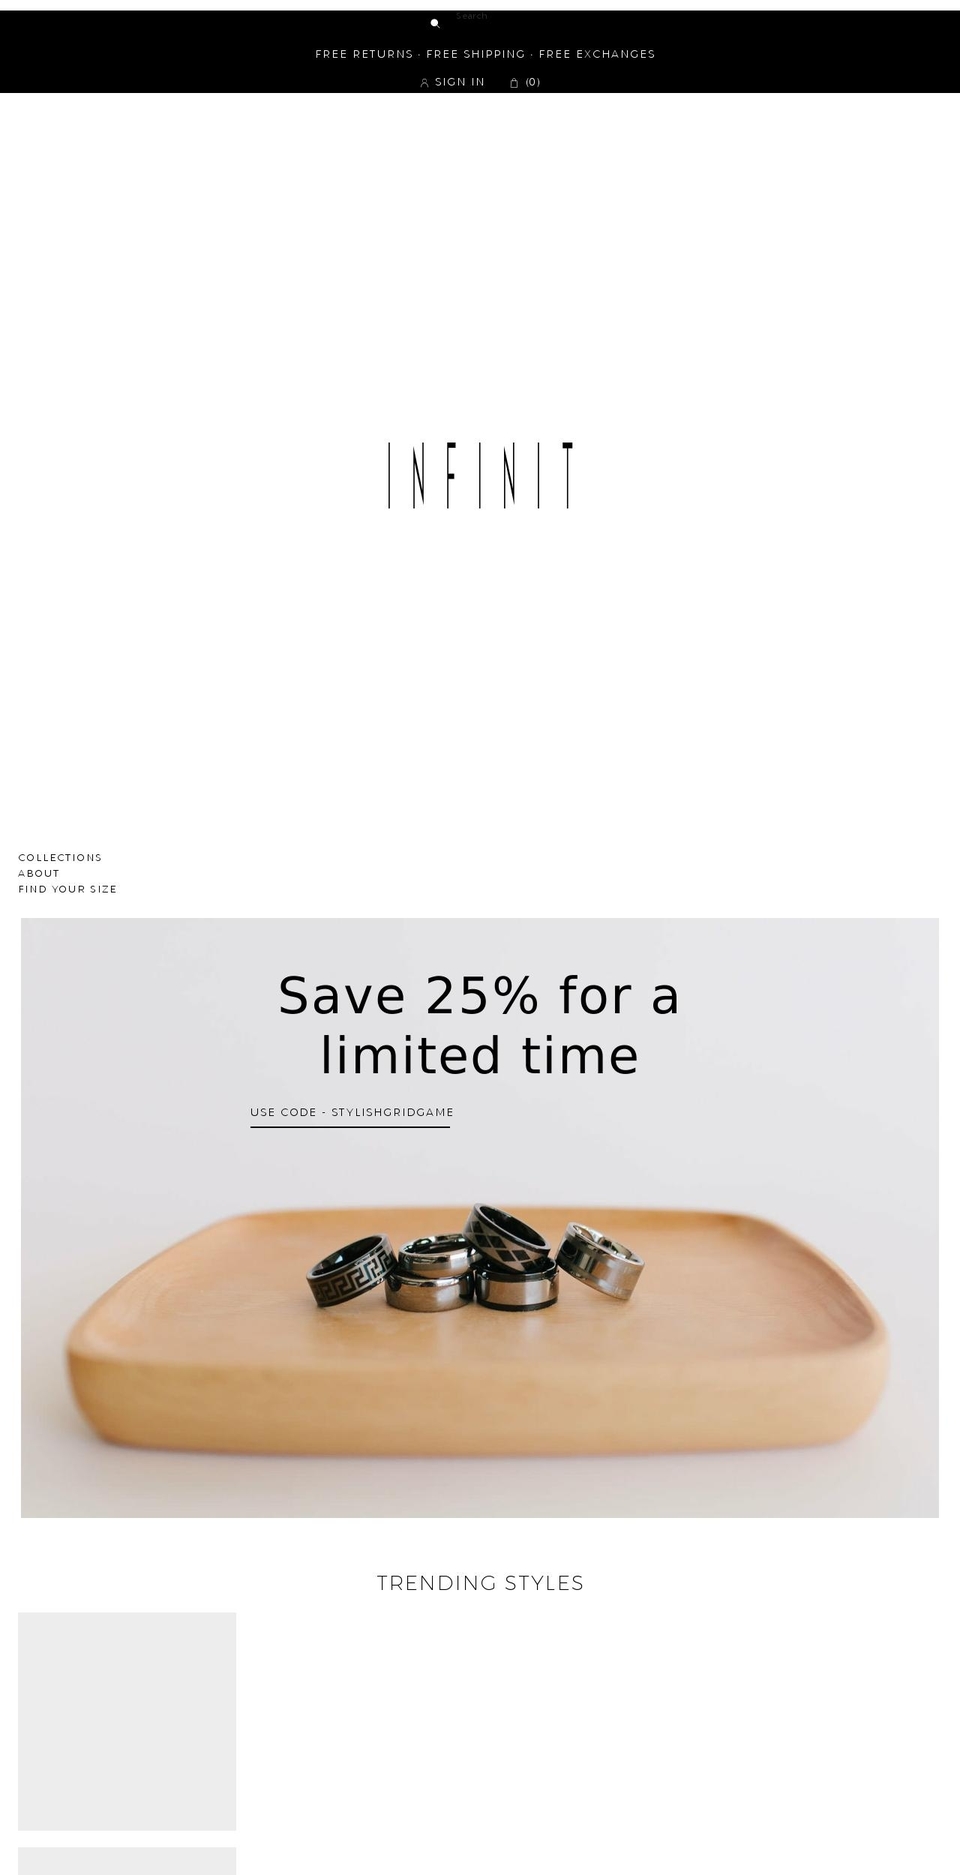 infinit Shopify theme site example infinitrings.com